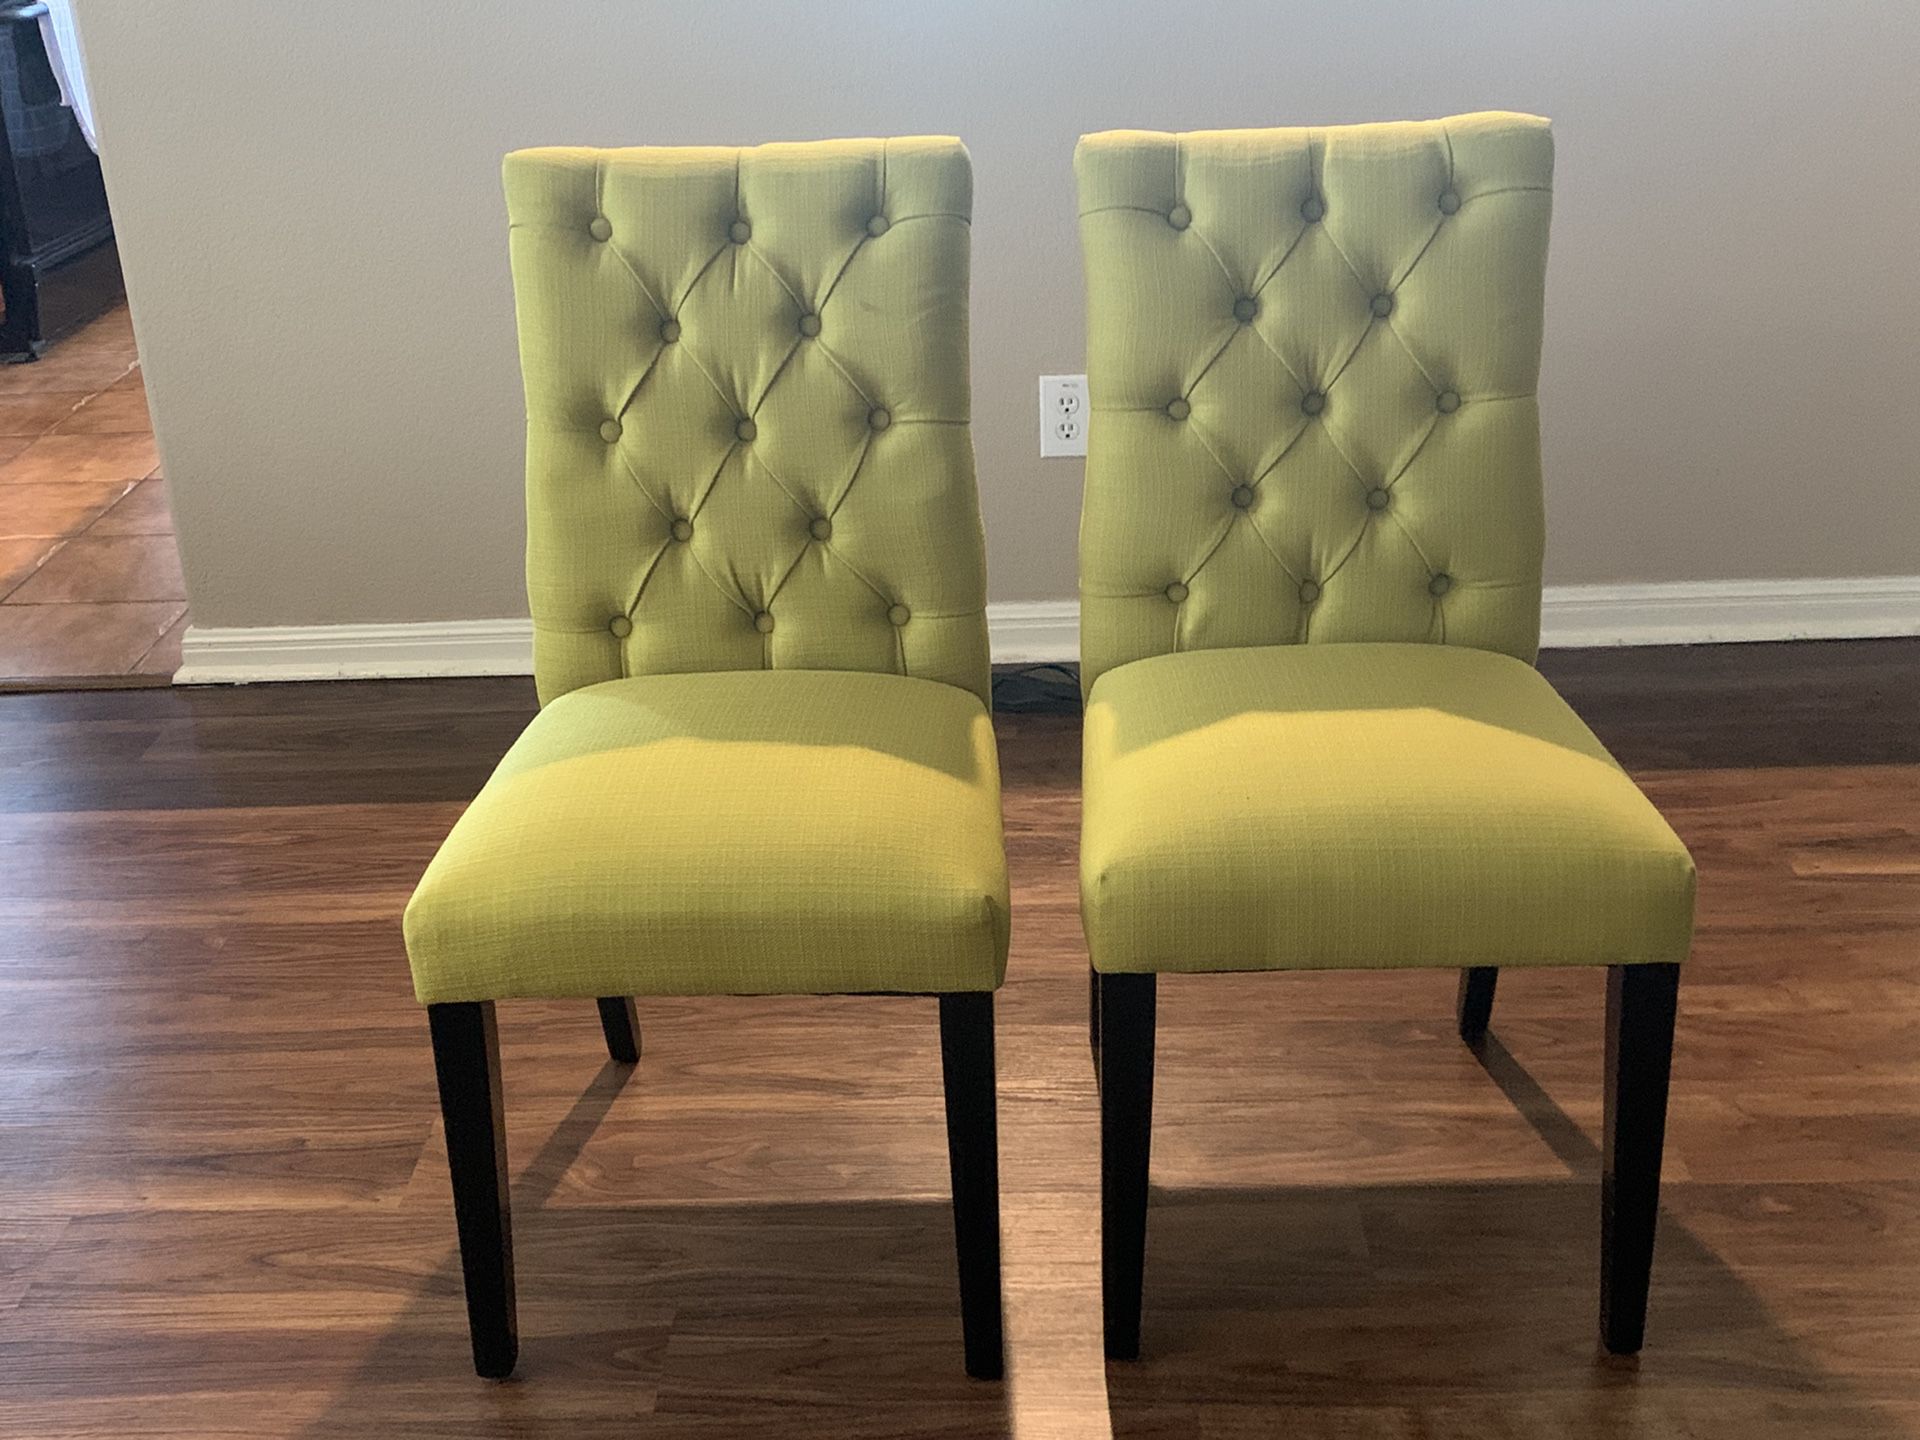 2 lime green chairs - black wooden legs